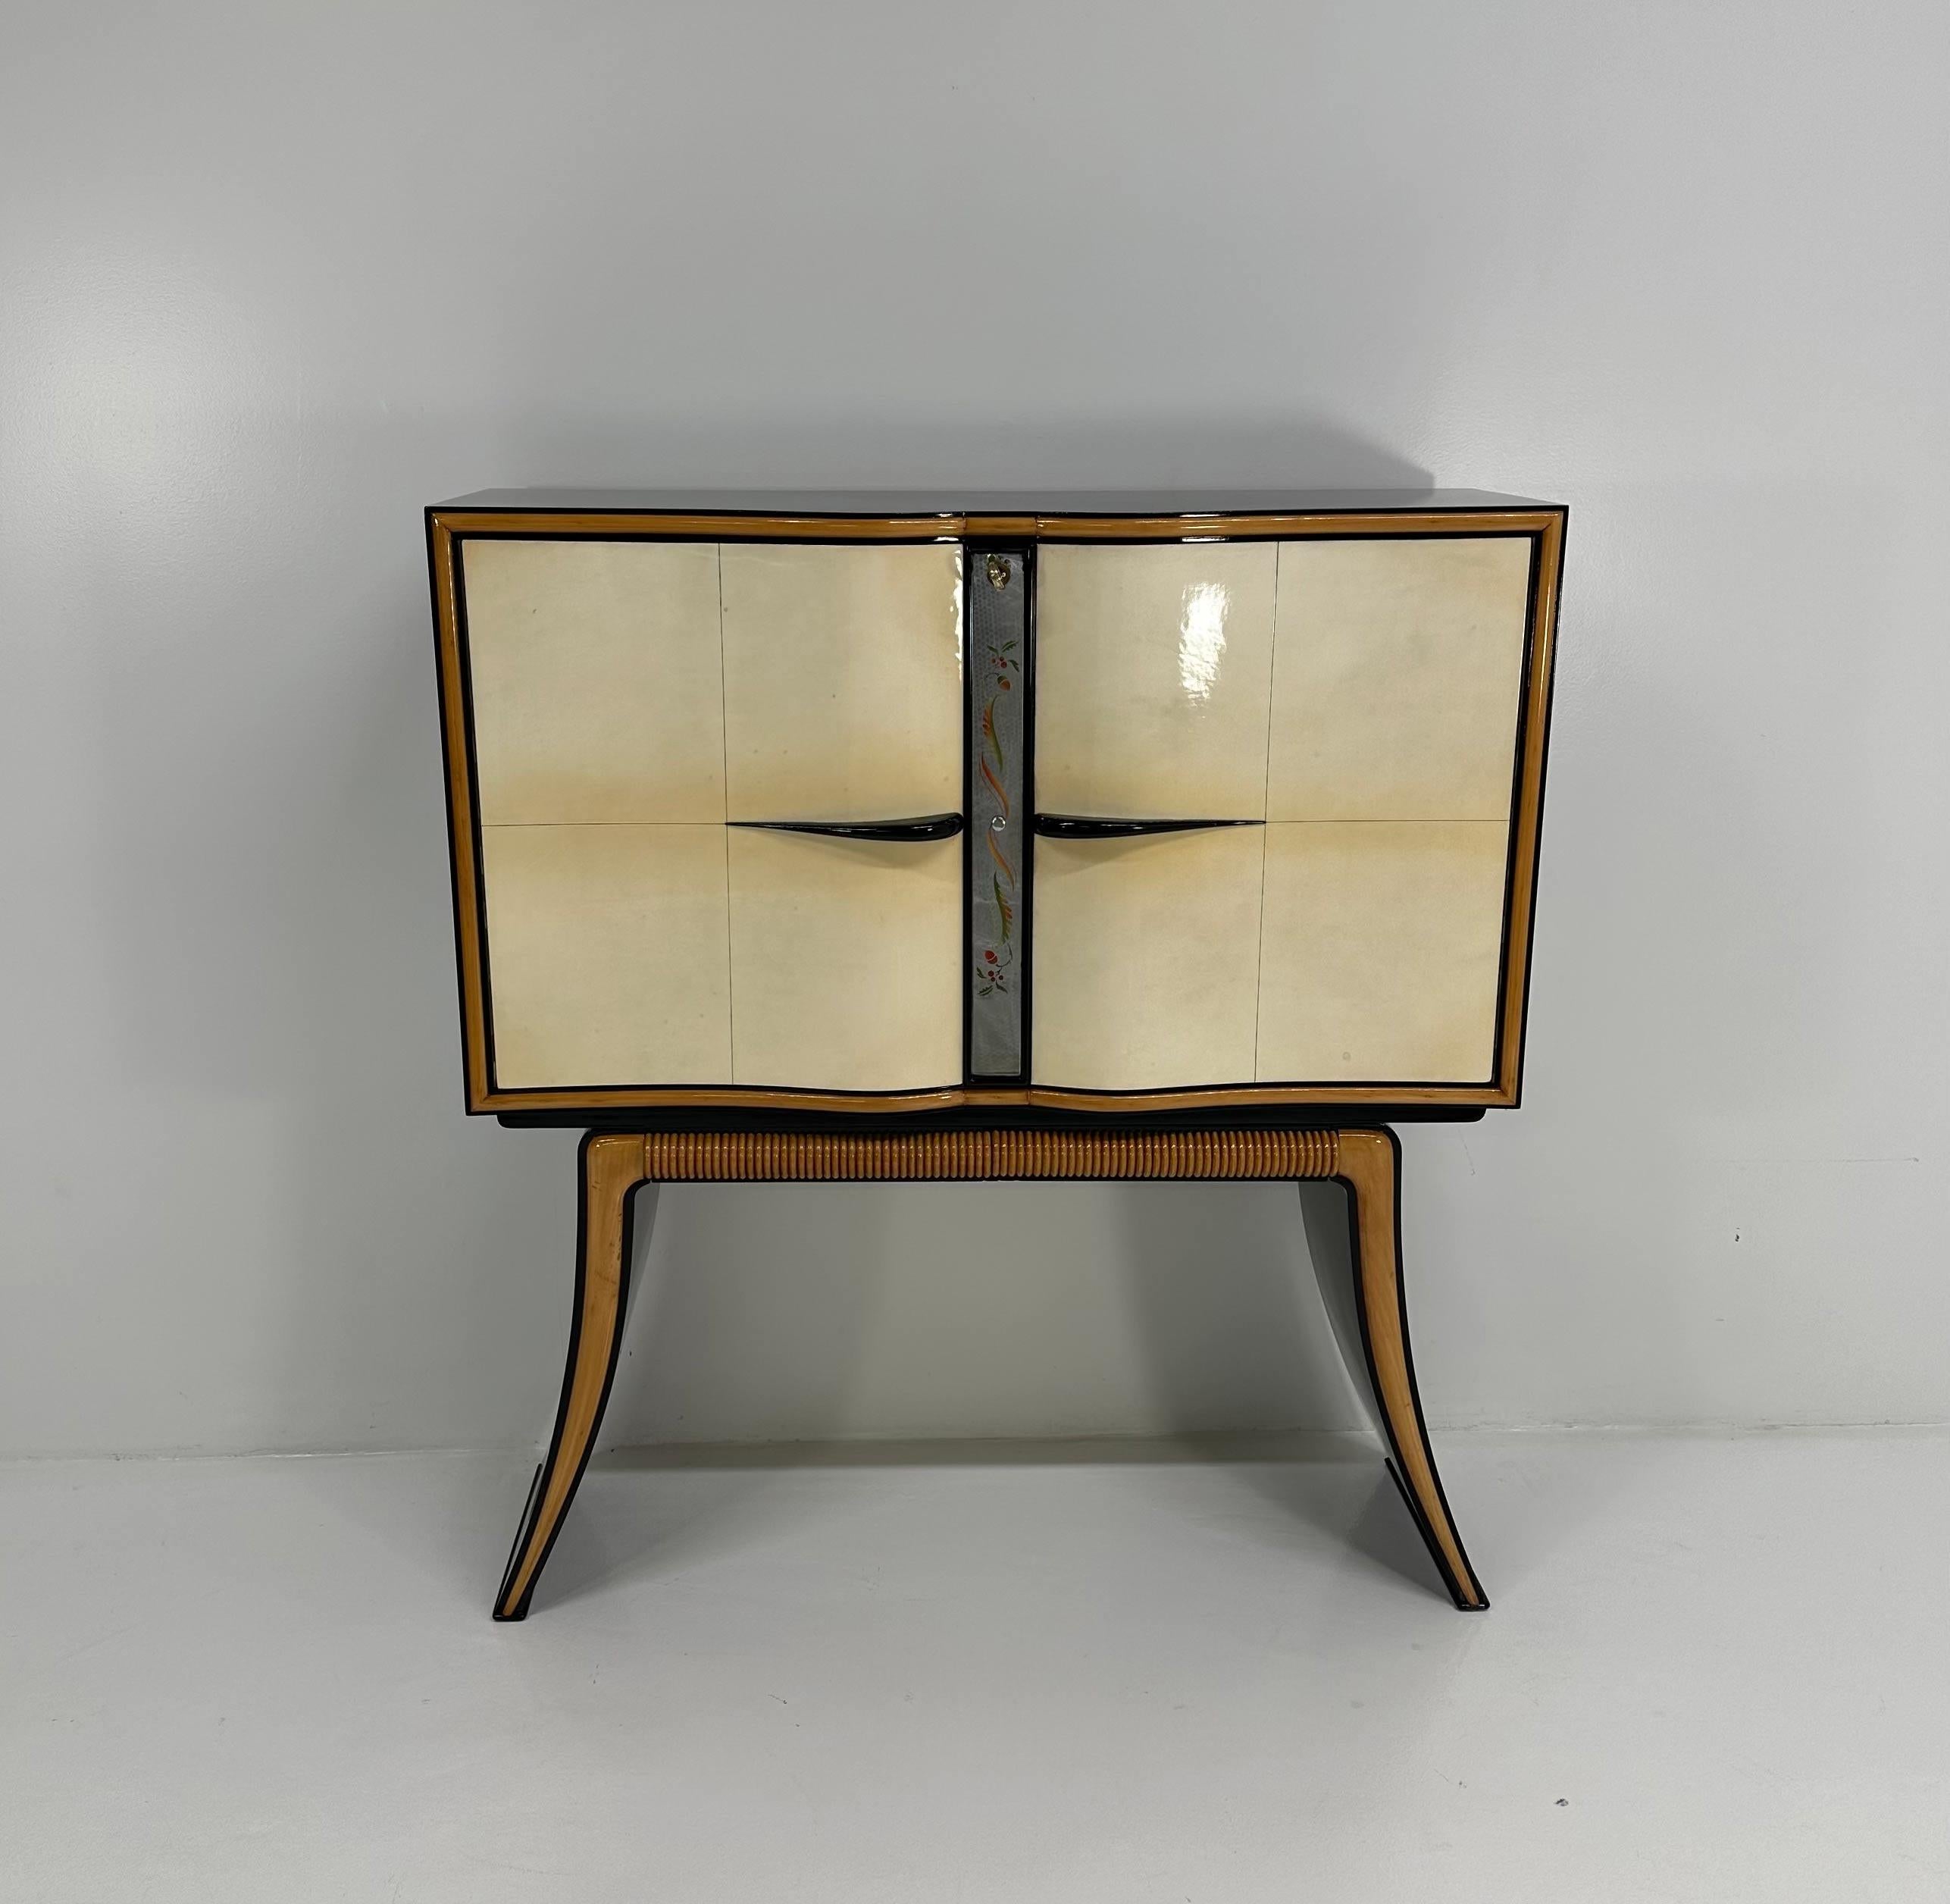 This precious and unique bar cabinet was produced in Italy in the 40s by Paolo Buffa.
The doors are in parchment, the profiles on the legs are in solid maple while the structure is black lacquered.
The front of the cabinet and the inside of the